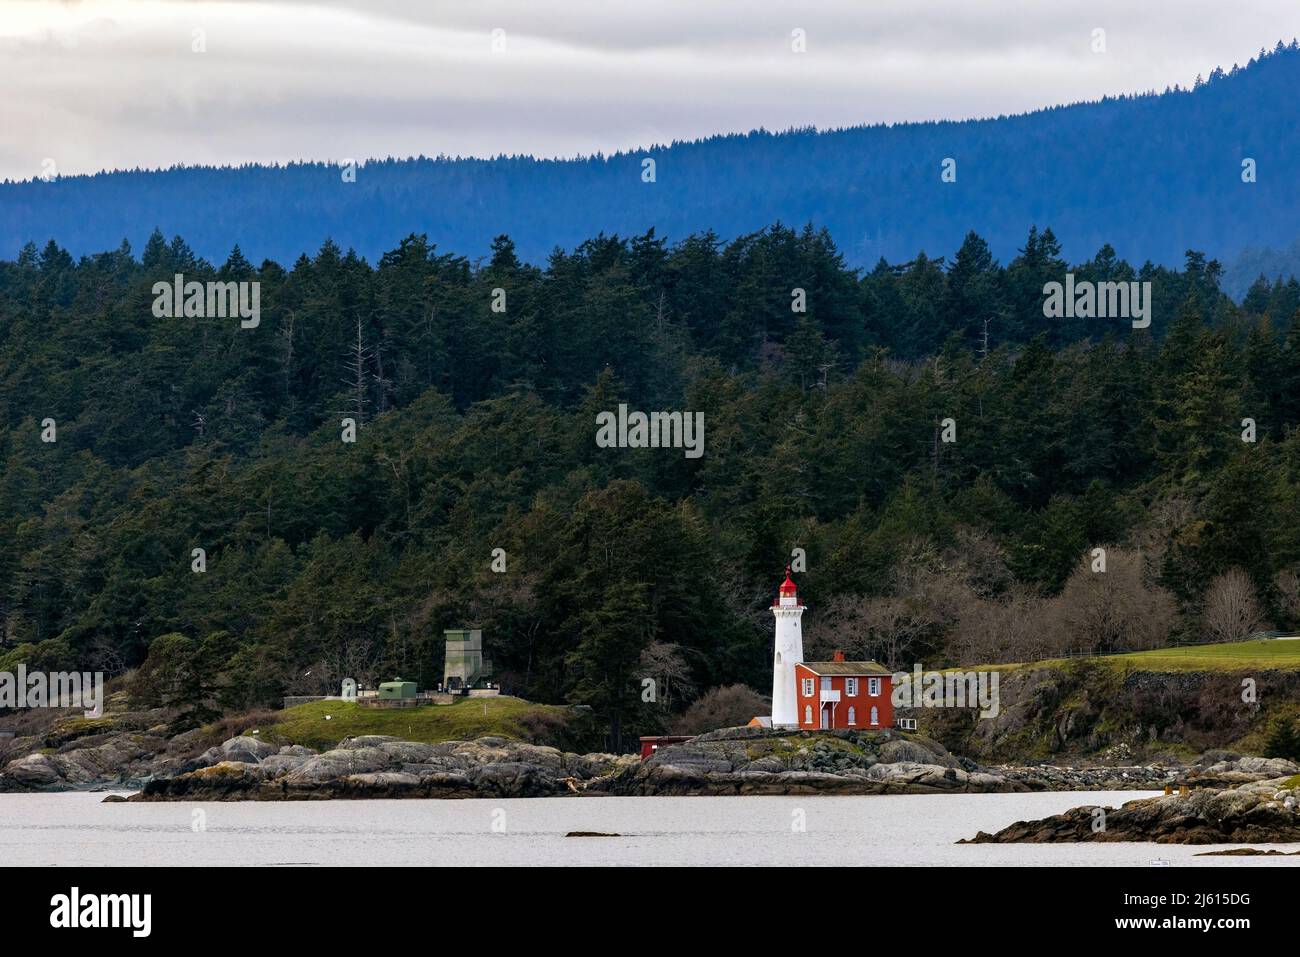 View of Fisgard Lighthouse from Saxe Point Park in Esquimalt - Victoria, Vancouver Island, British Columbia, Canada Stock Photo